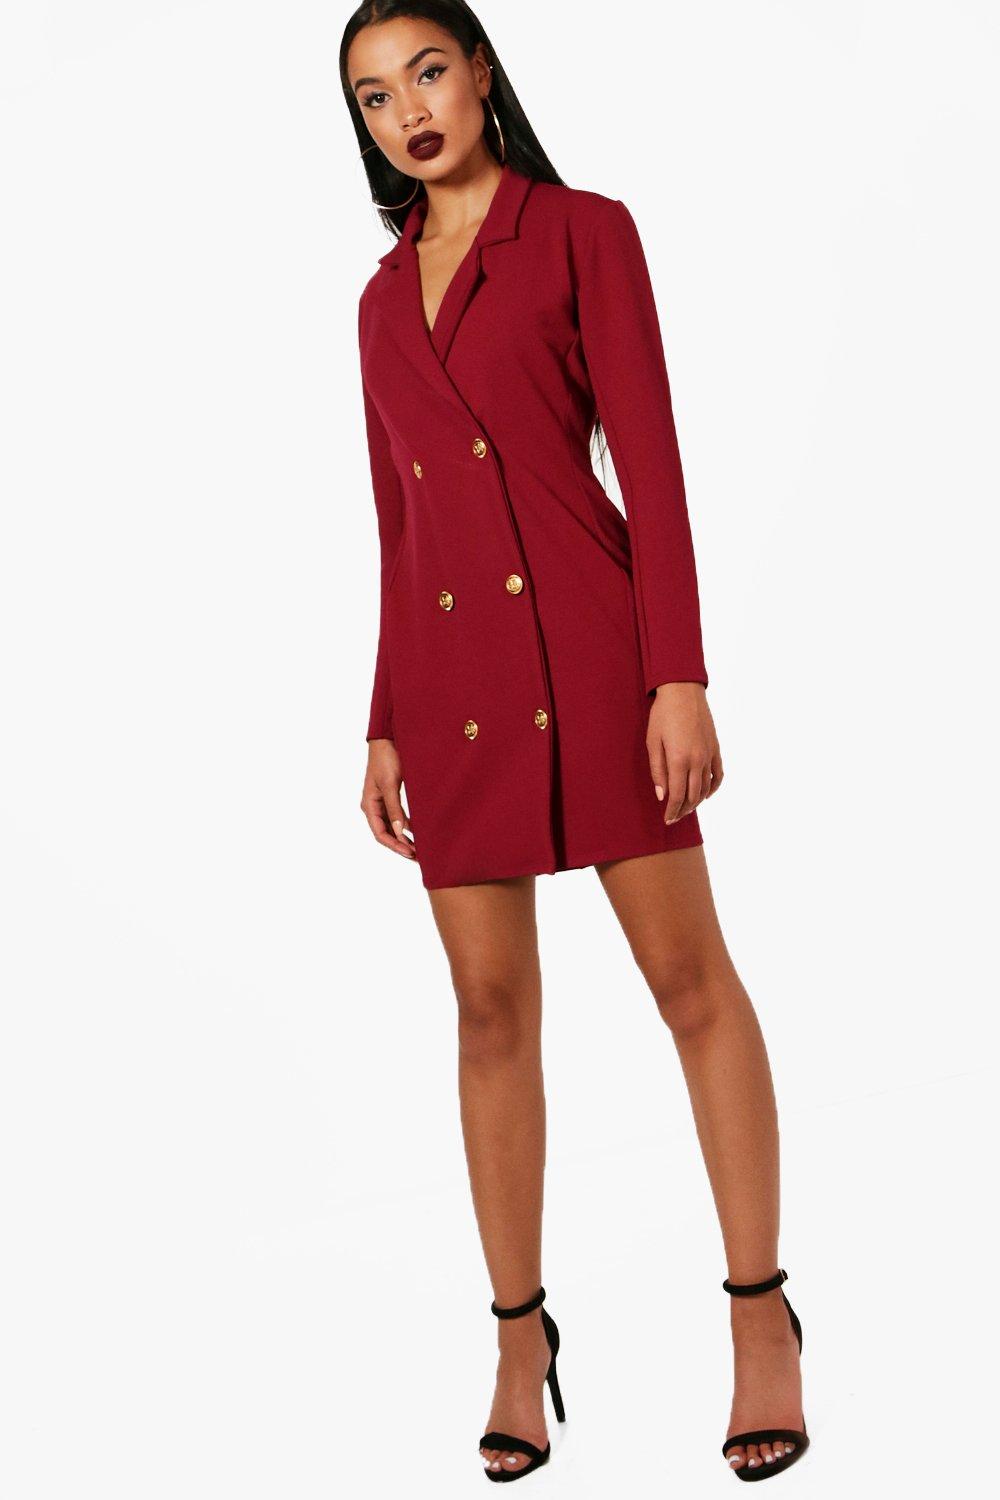 double breasted blazer dresses